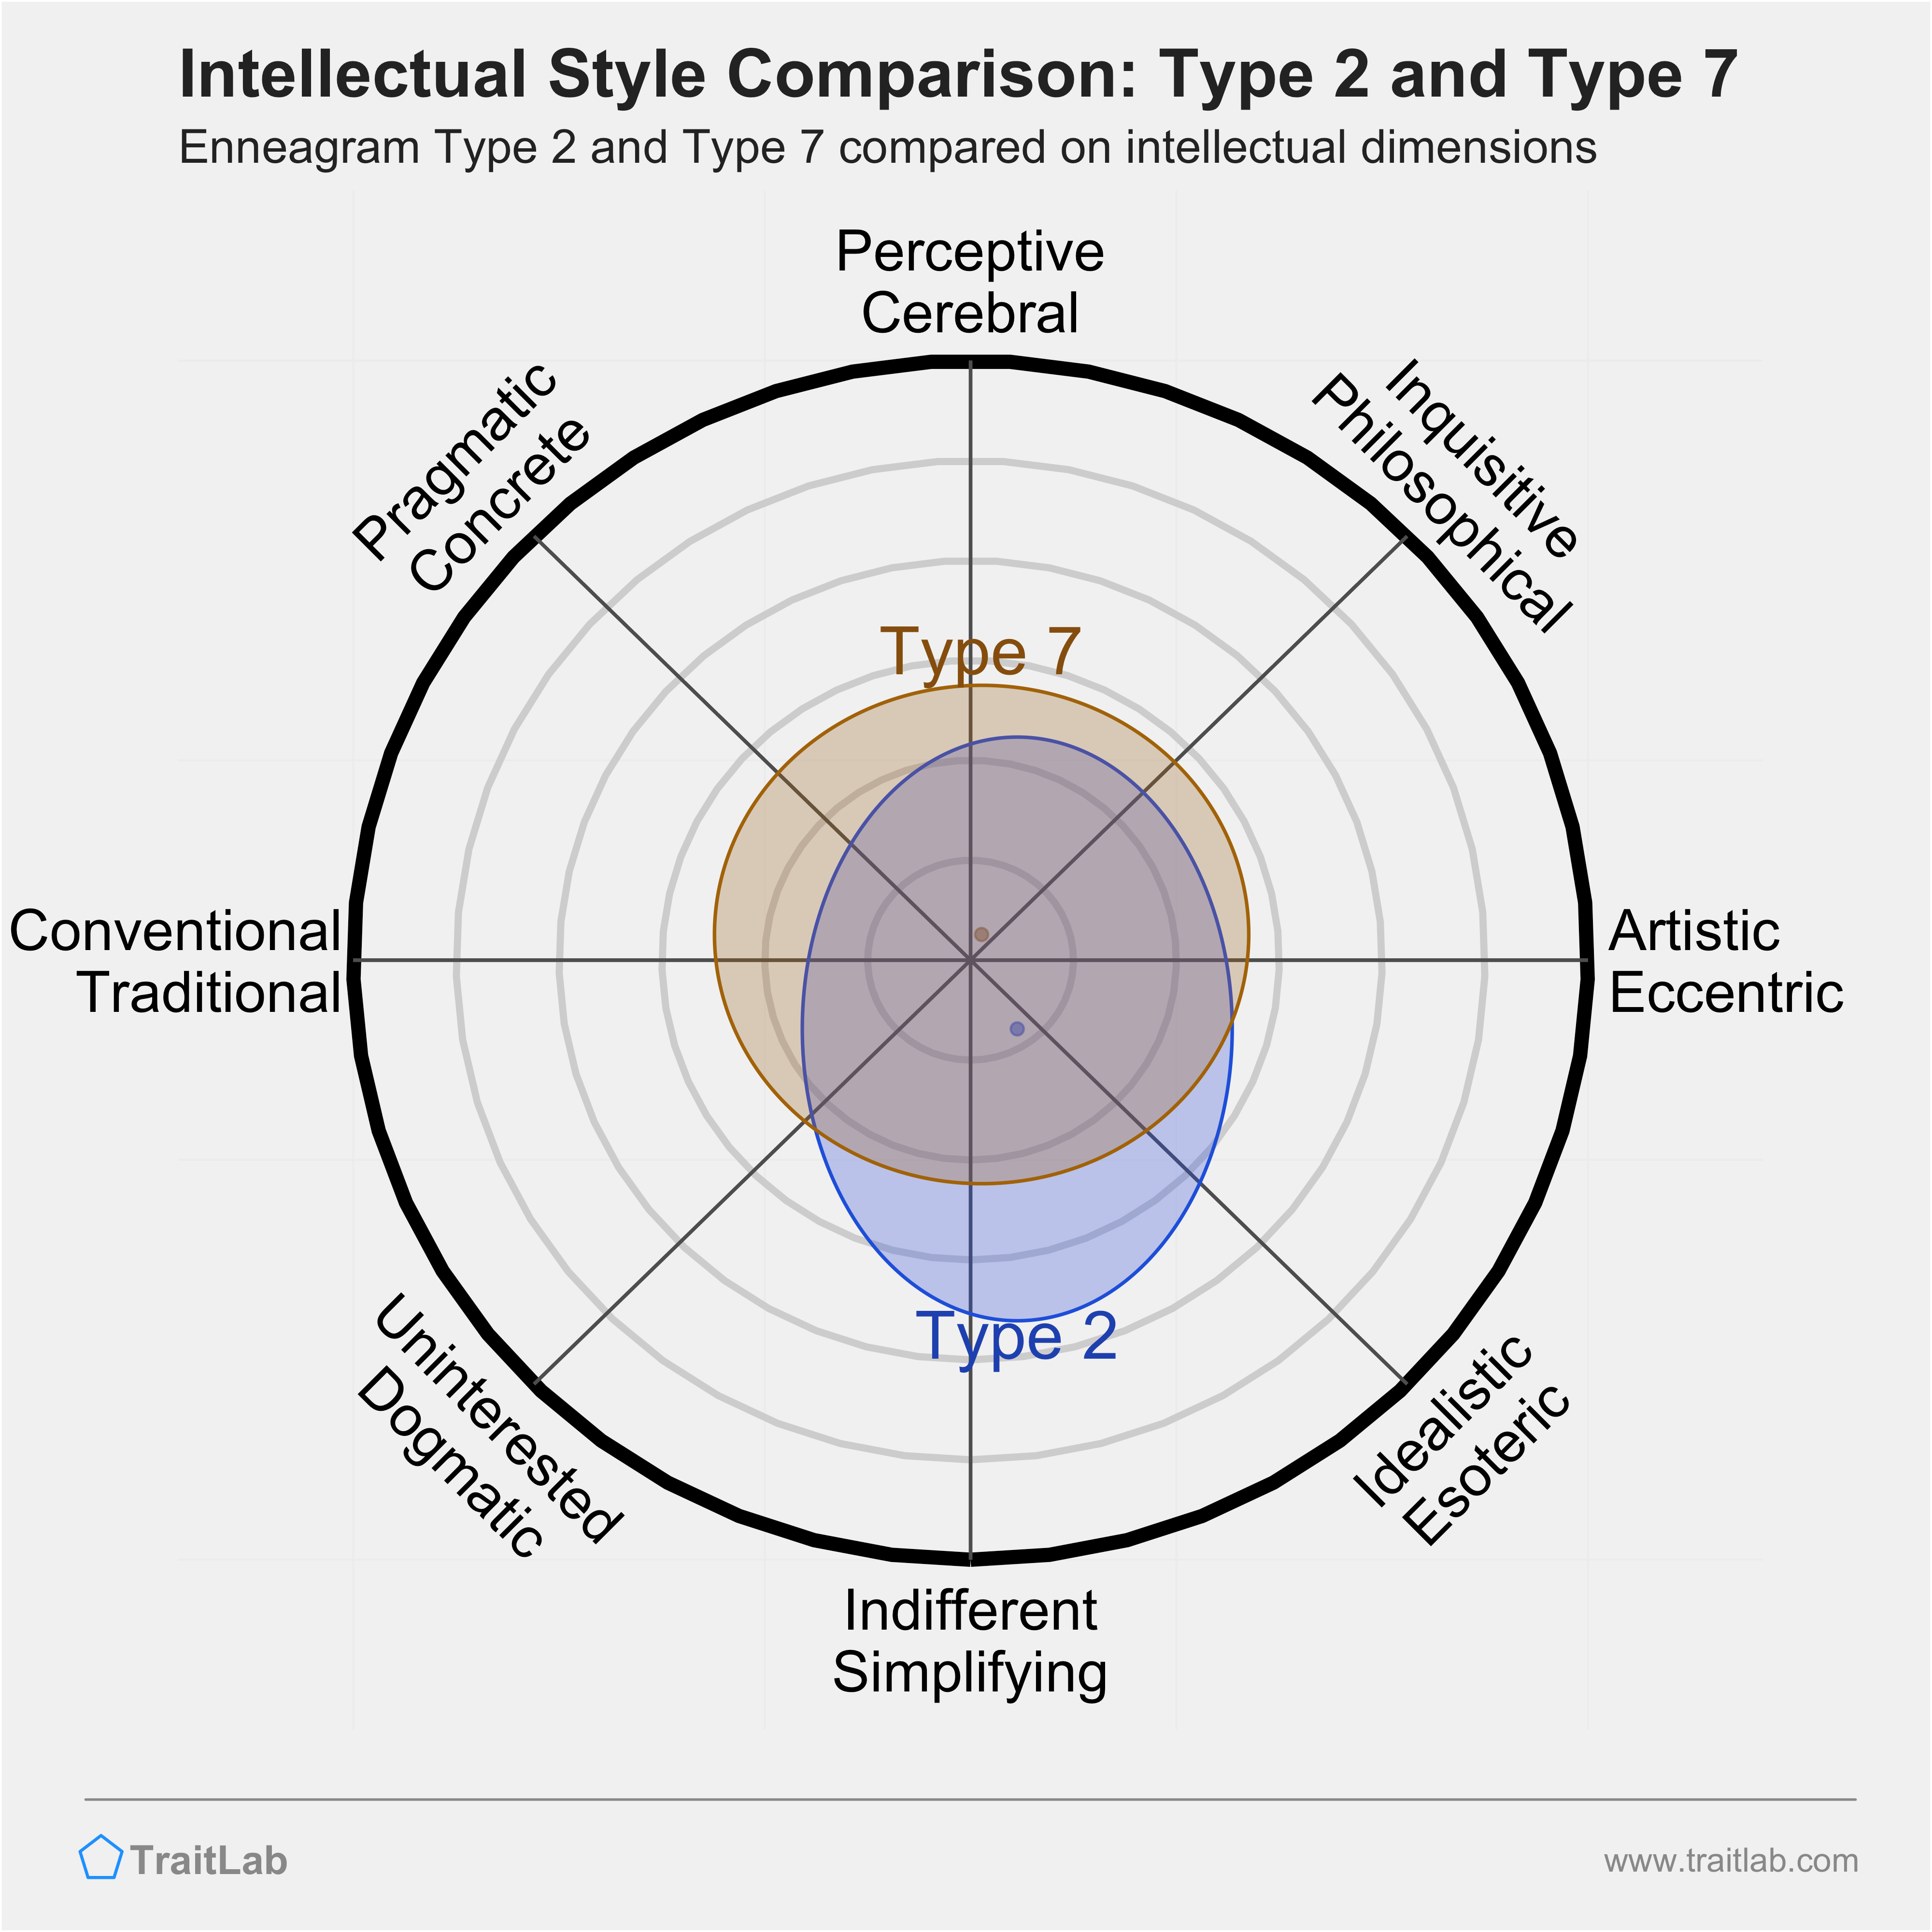 Type 2 and Type 7 comparison across intellectual dimensions